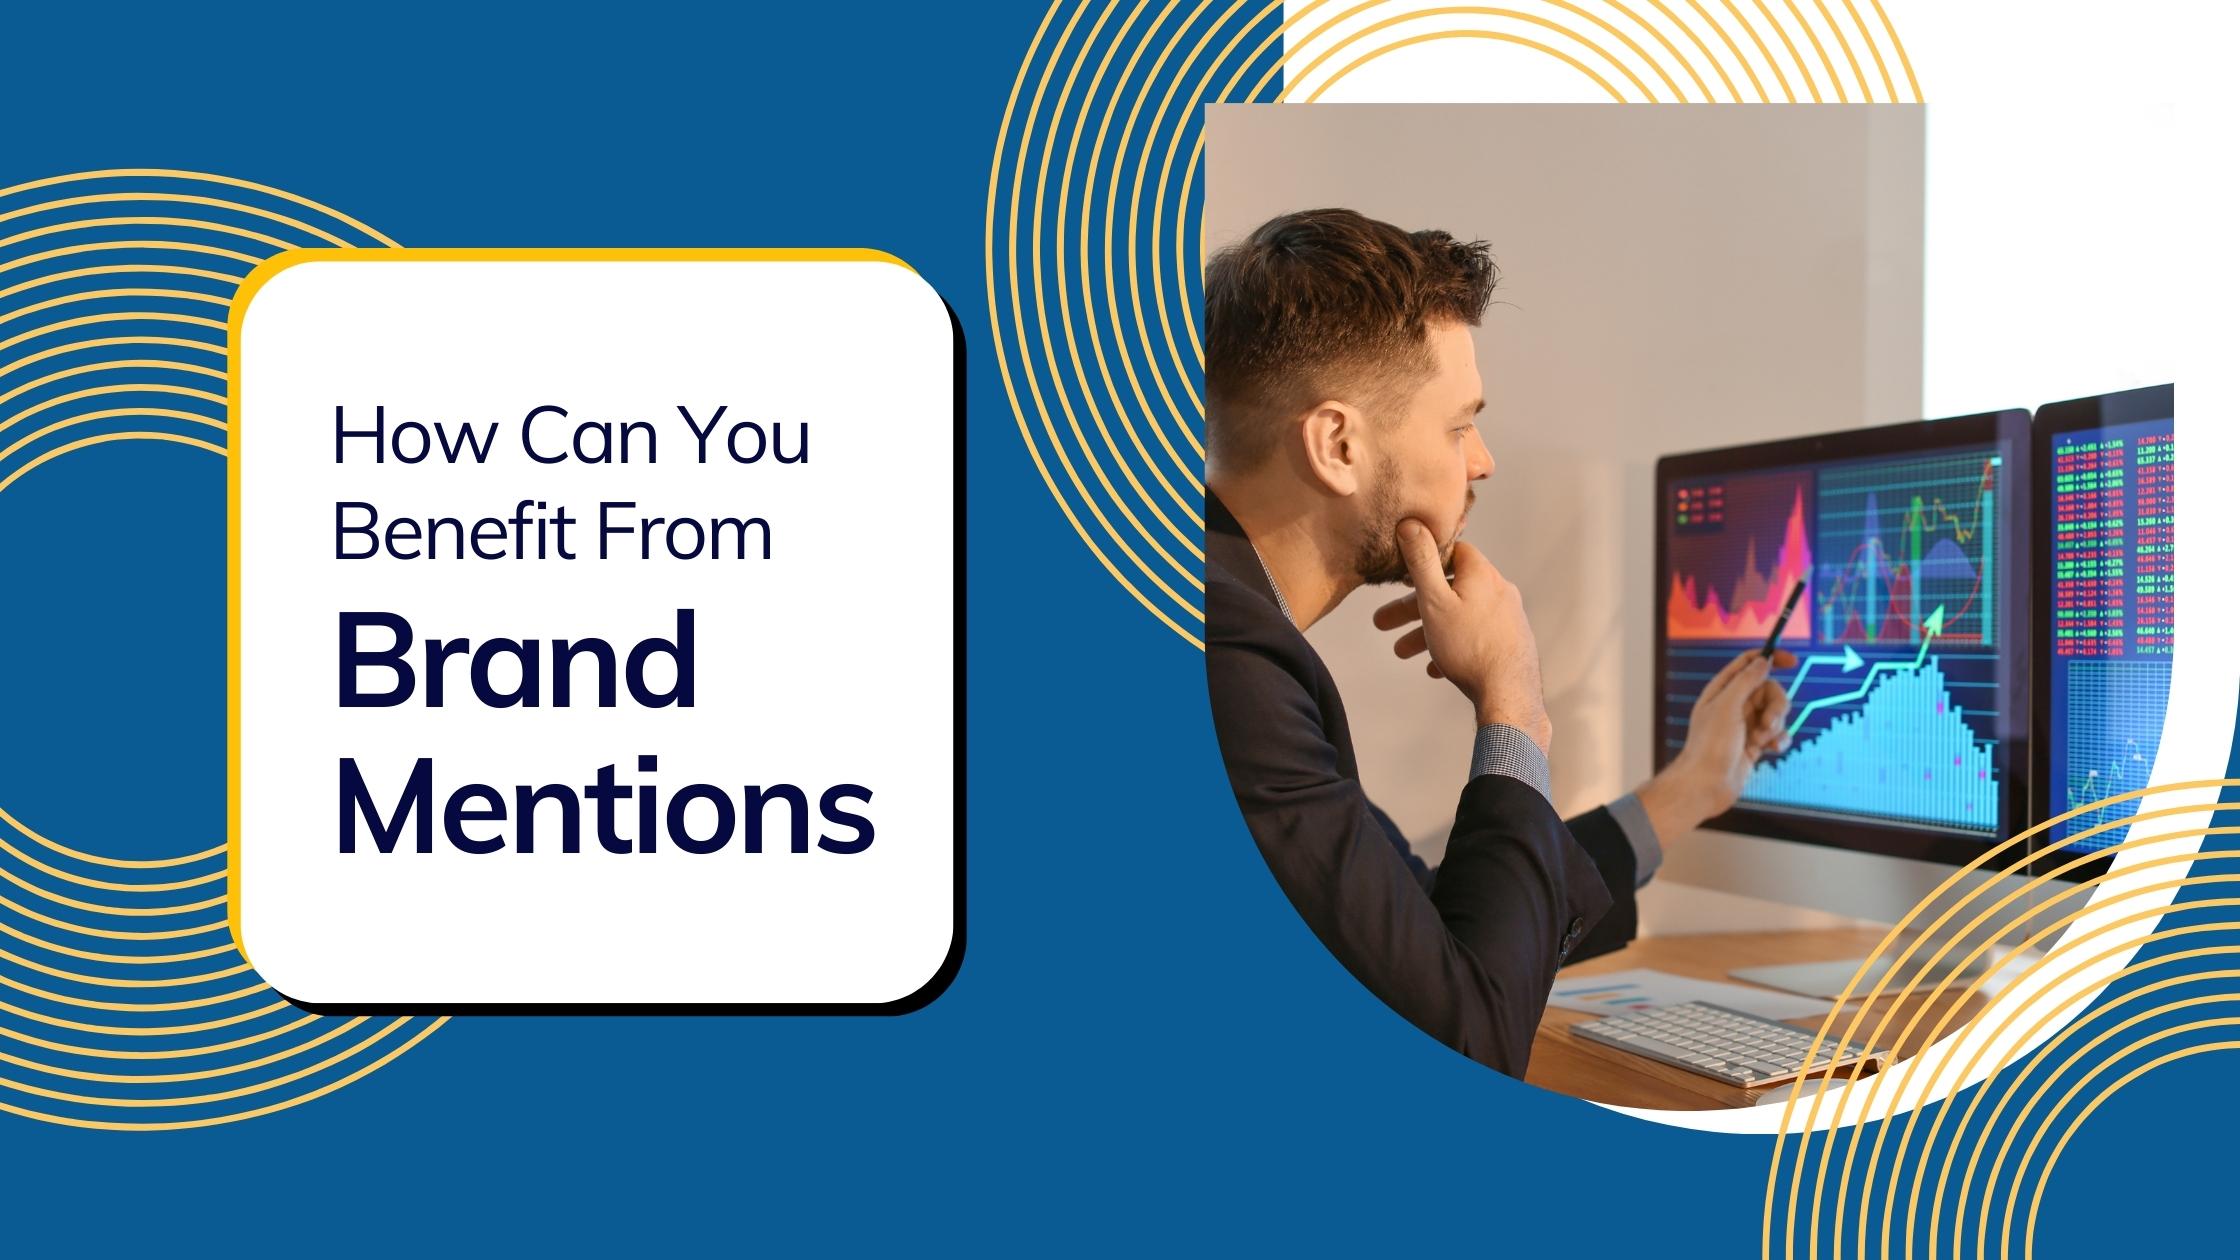 How Can You Benefit From Brand Mentions